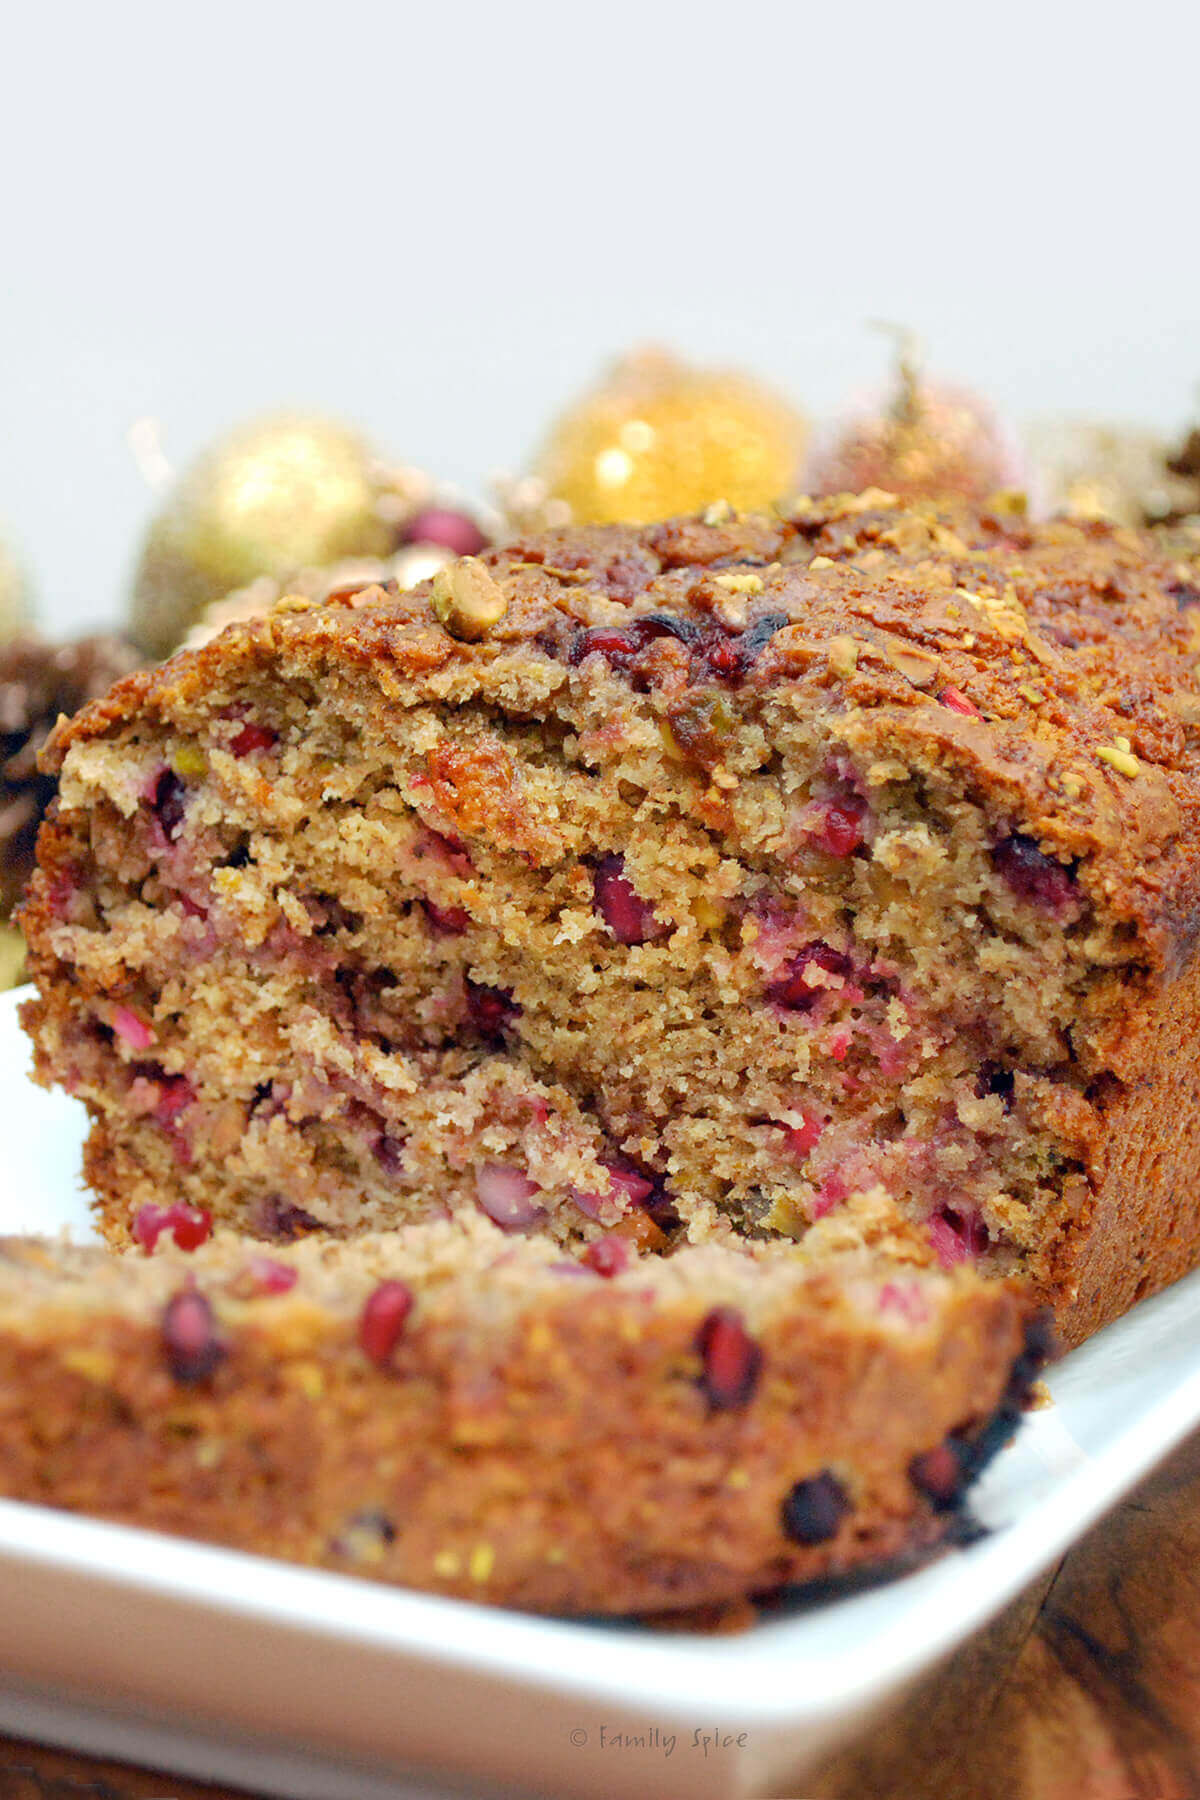 A loaf of pomegranate banana bread with a slice cut off